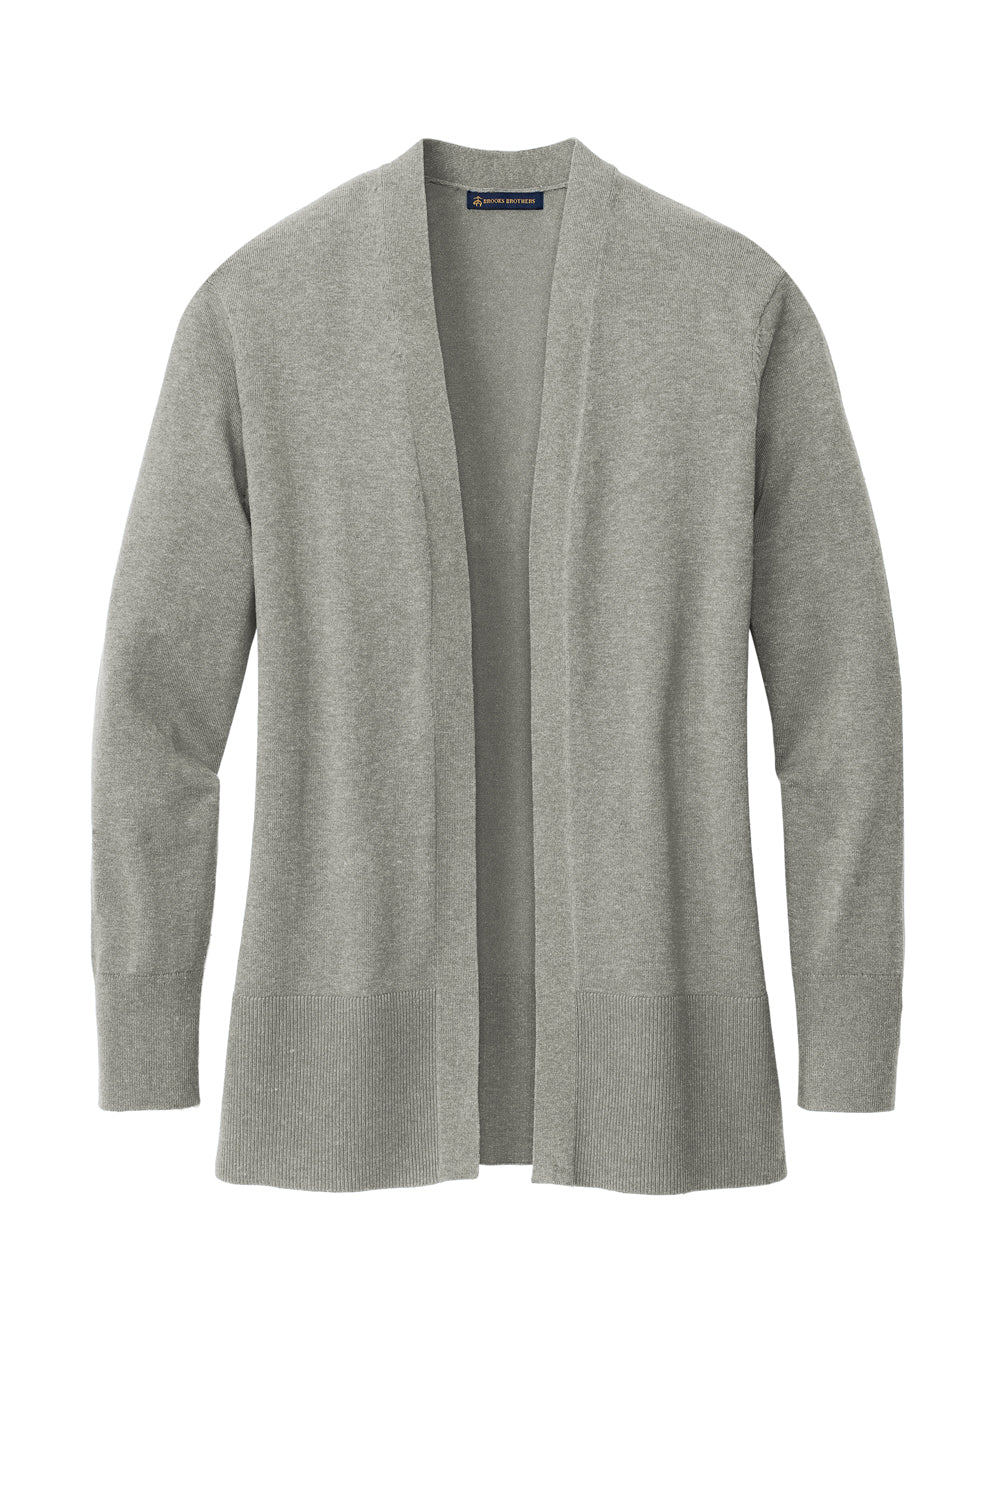 Brooks Brothers Womens Long Sleeeve Cardigan Sweater Heather Light Shadow Grey Flat Front